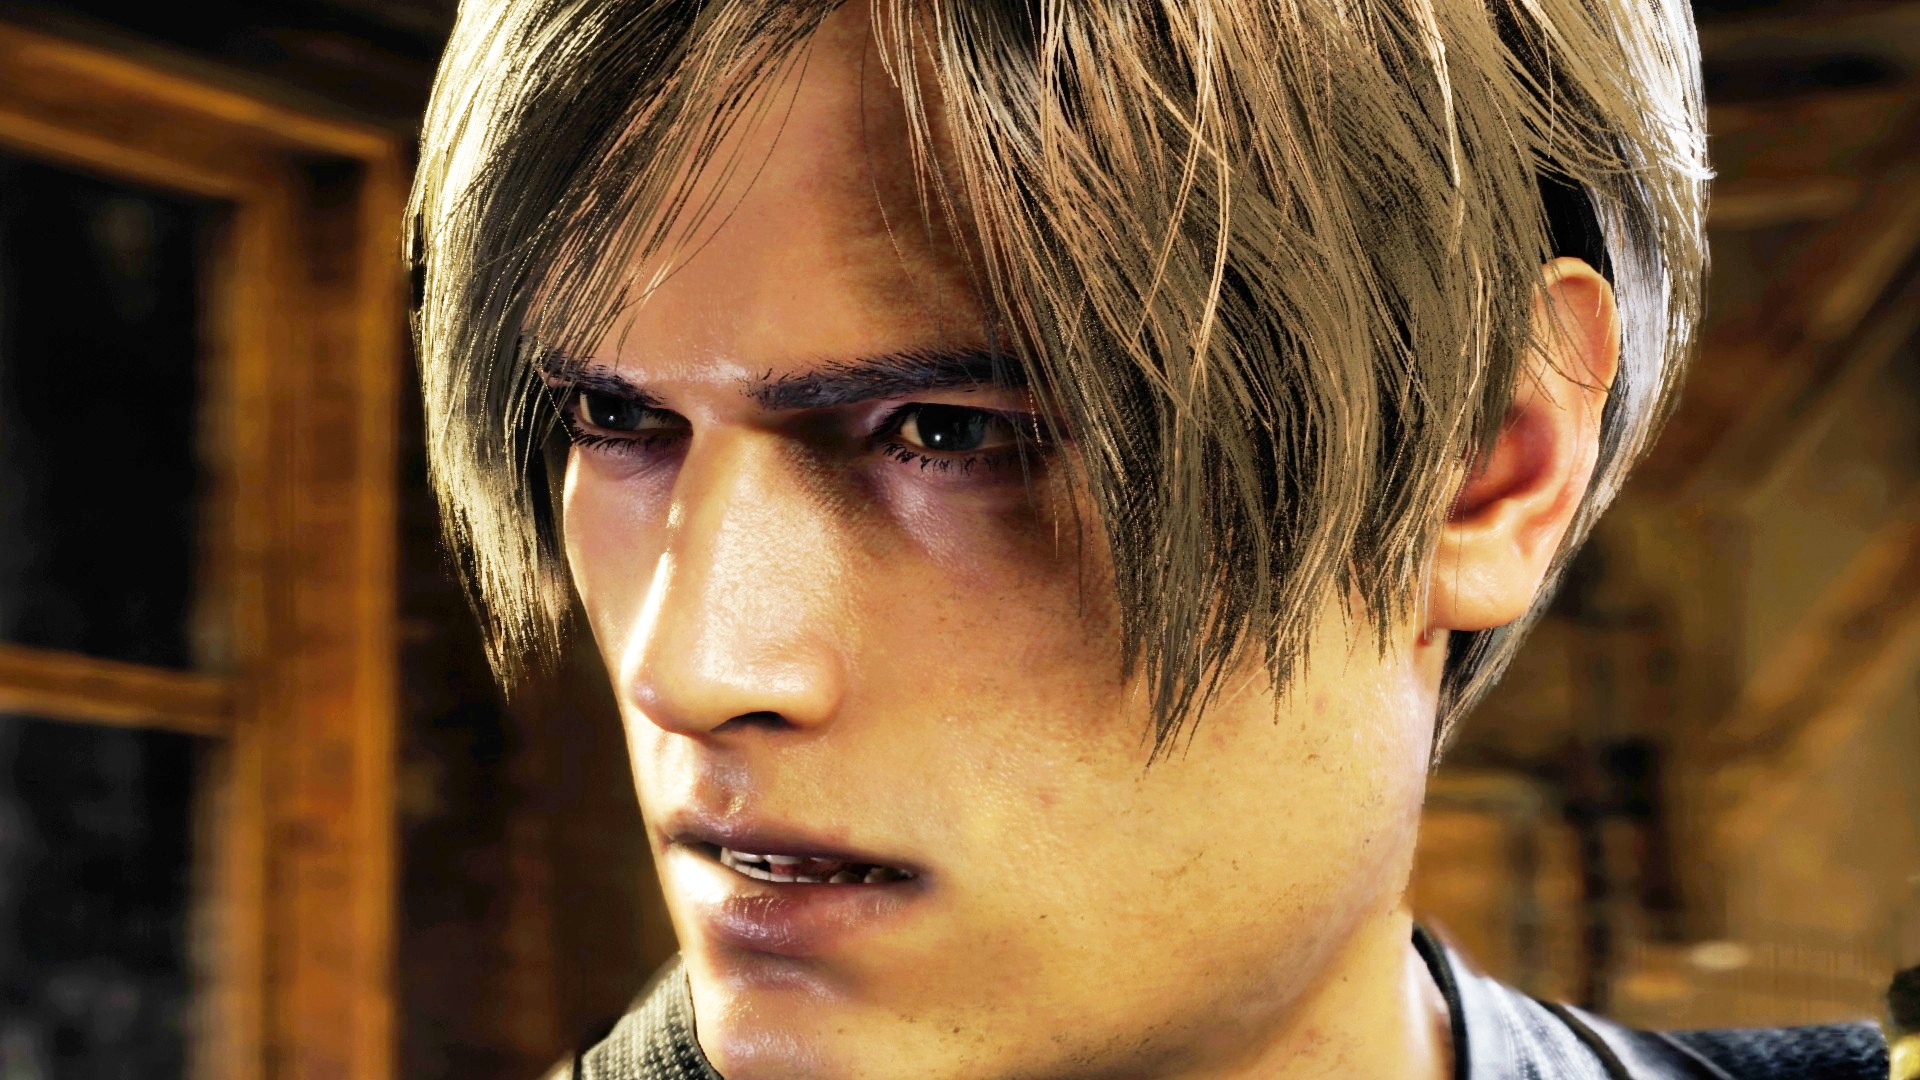 Resident Evil 4 Remake: New Details; New Enemies, Gameplay